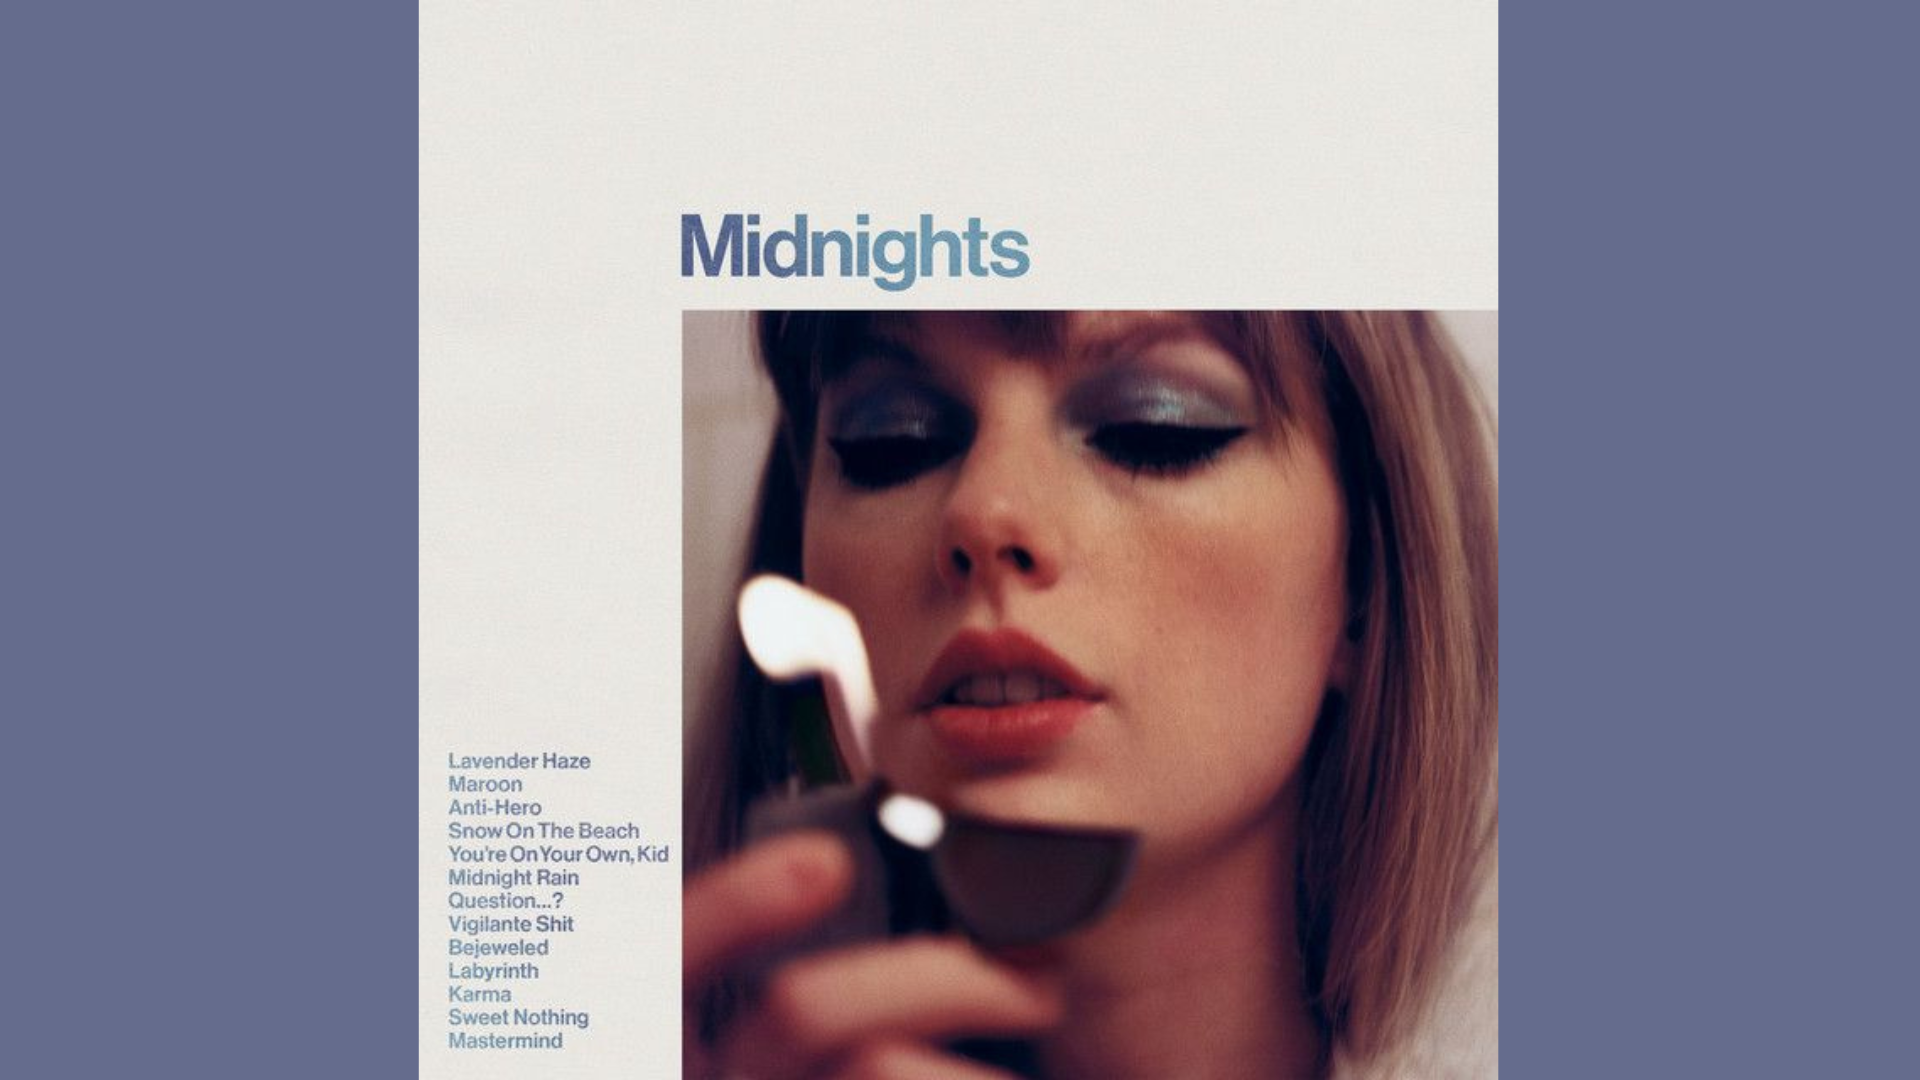 "Midnights" album cover art is the property of Taylor Swift and Republic Records. 